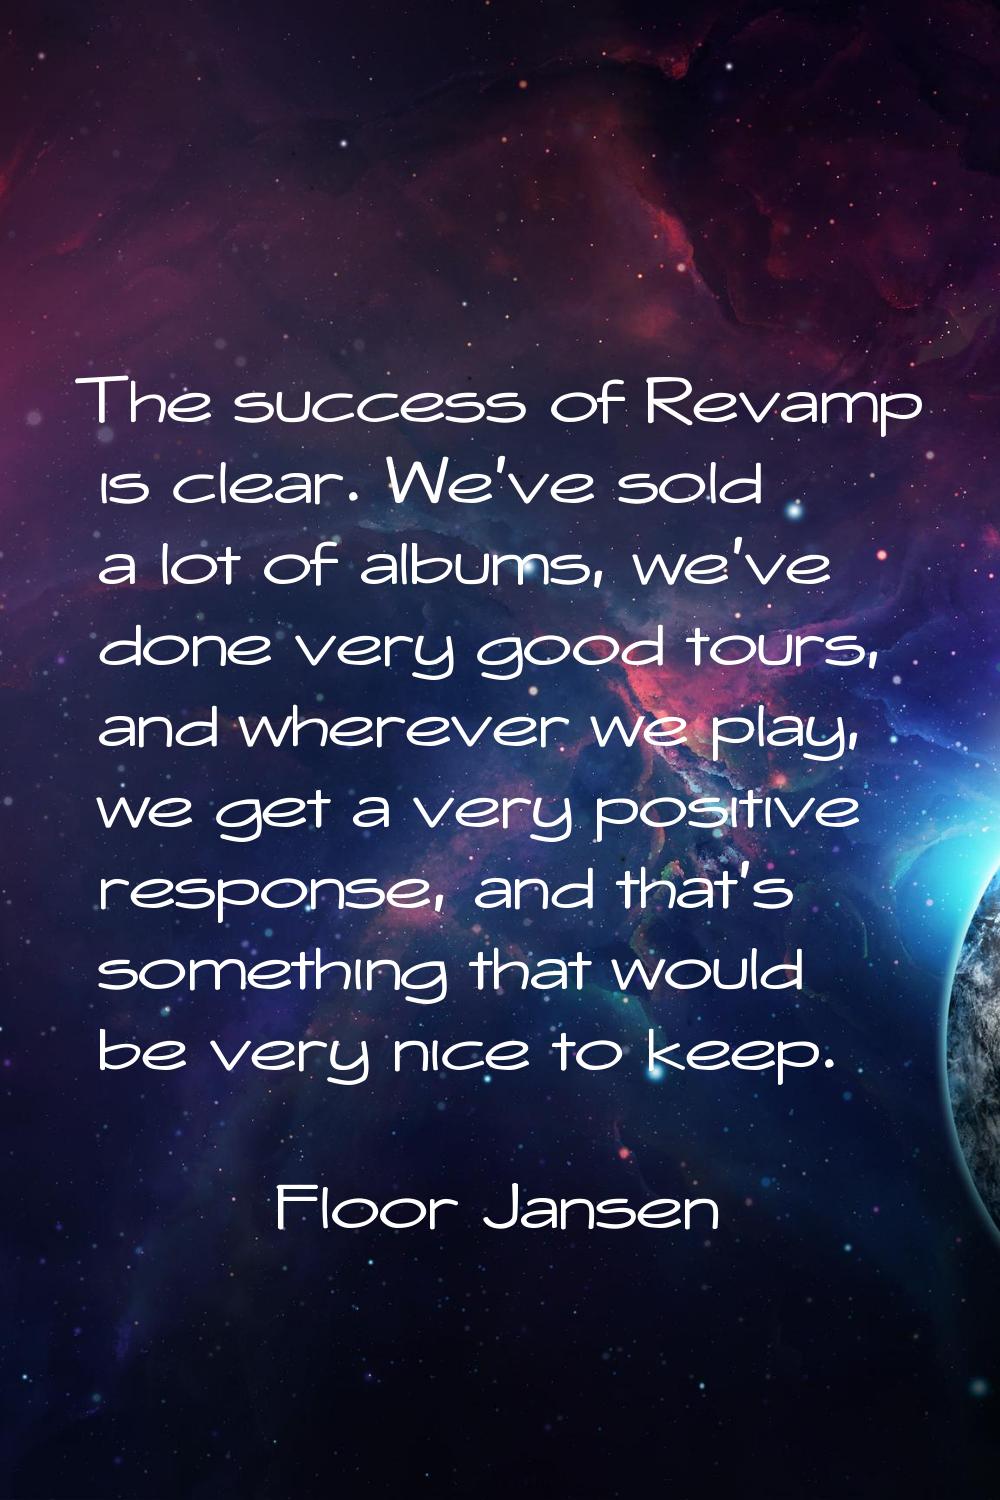 The success of Revamp is clear. We've sold a lot of albums, we've done very good tours, and whereve